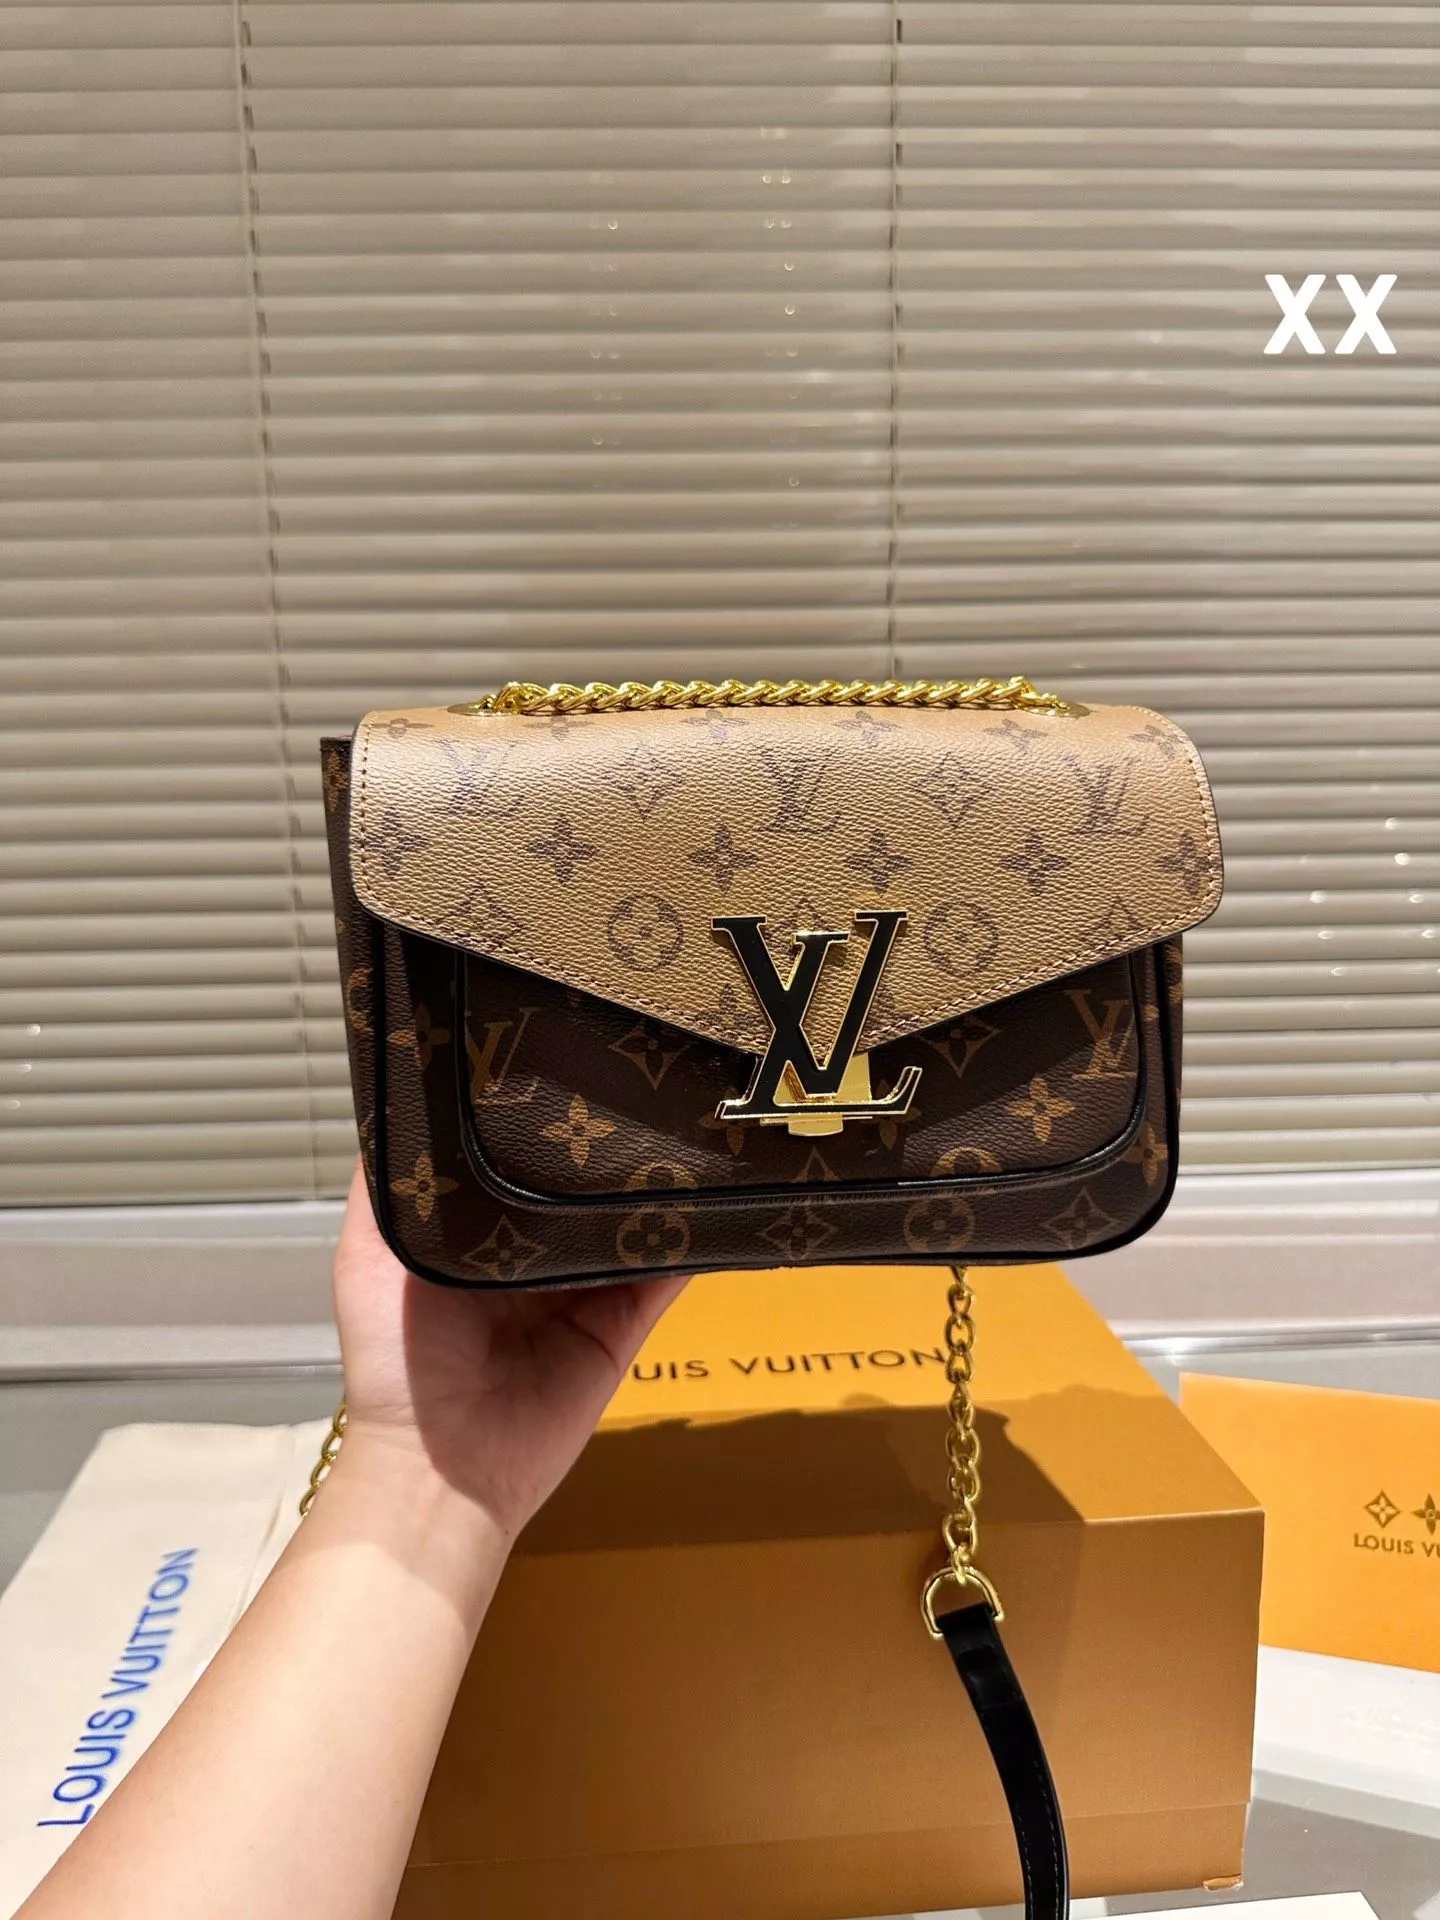 LV] ☆ super popular bag ☆, the quality is excellent, you are